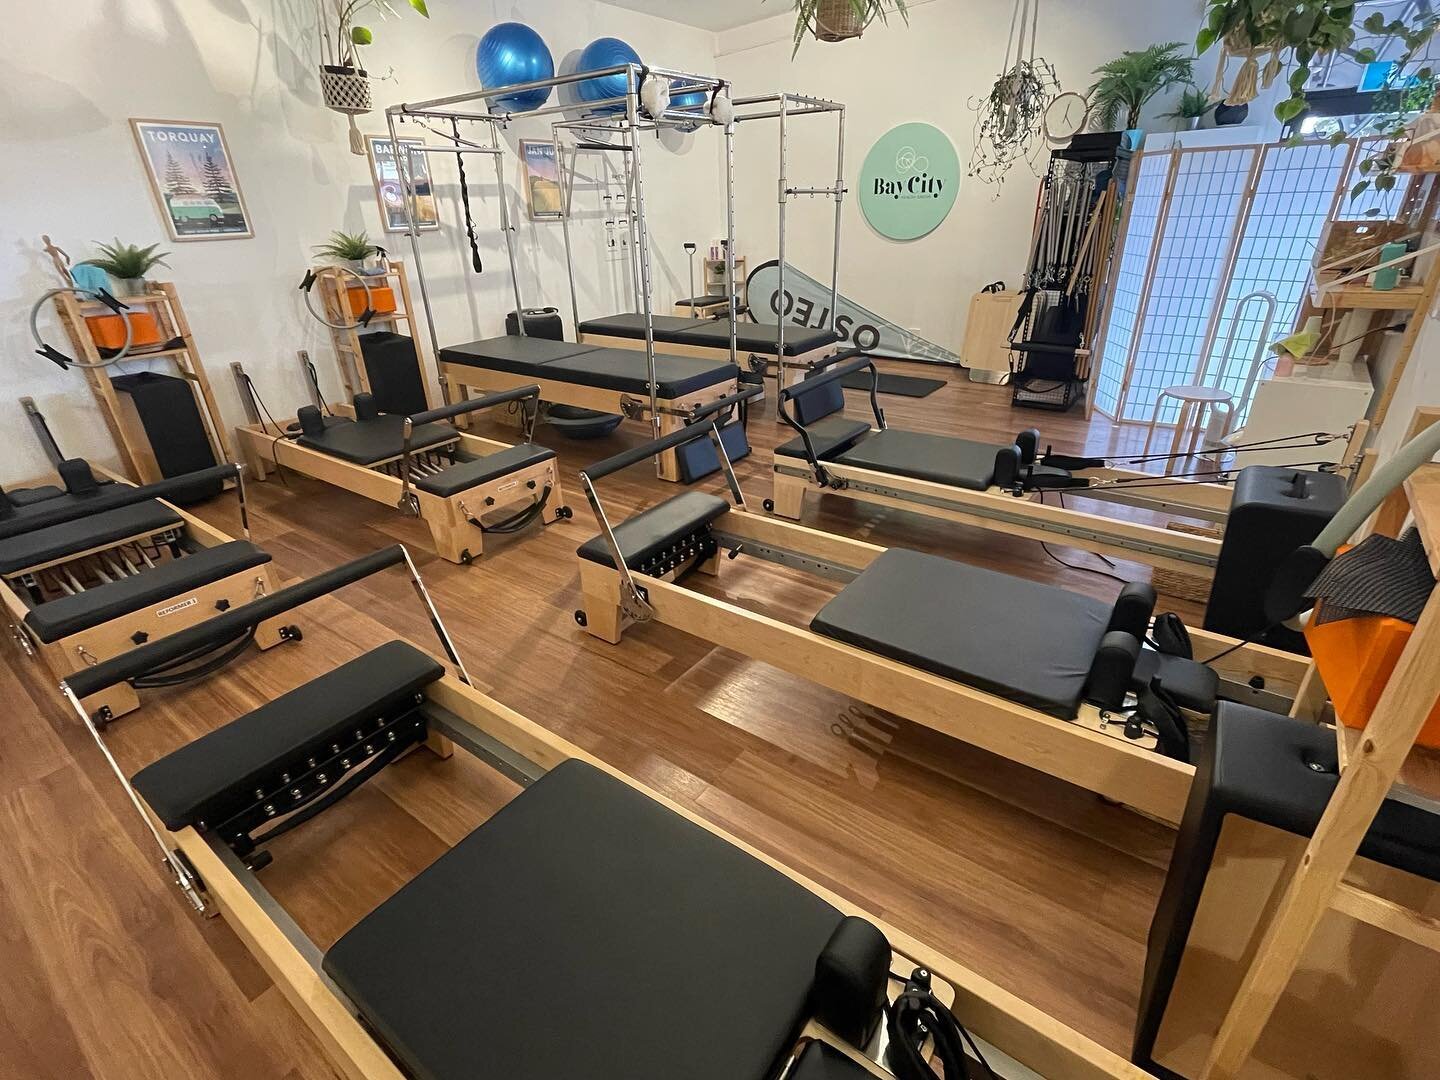 Our worst kept secret is here: A brand new Reformer and Trapeze/Reformer combo! 

It&rsquo;s been a really tough couple of years. When we first opened the business we actually had 7 reformers, however, during COVID we were forced to sell 2 machines t